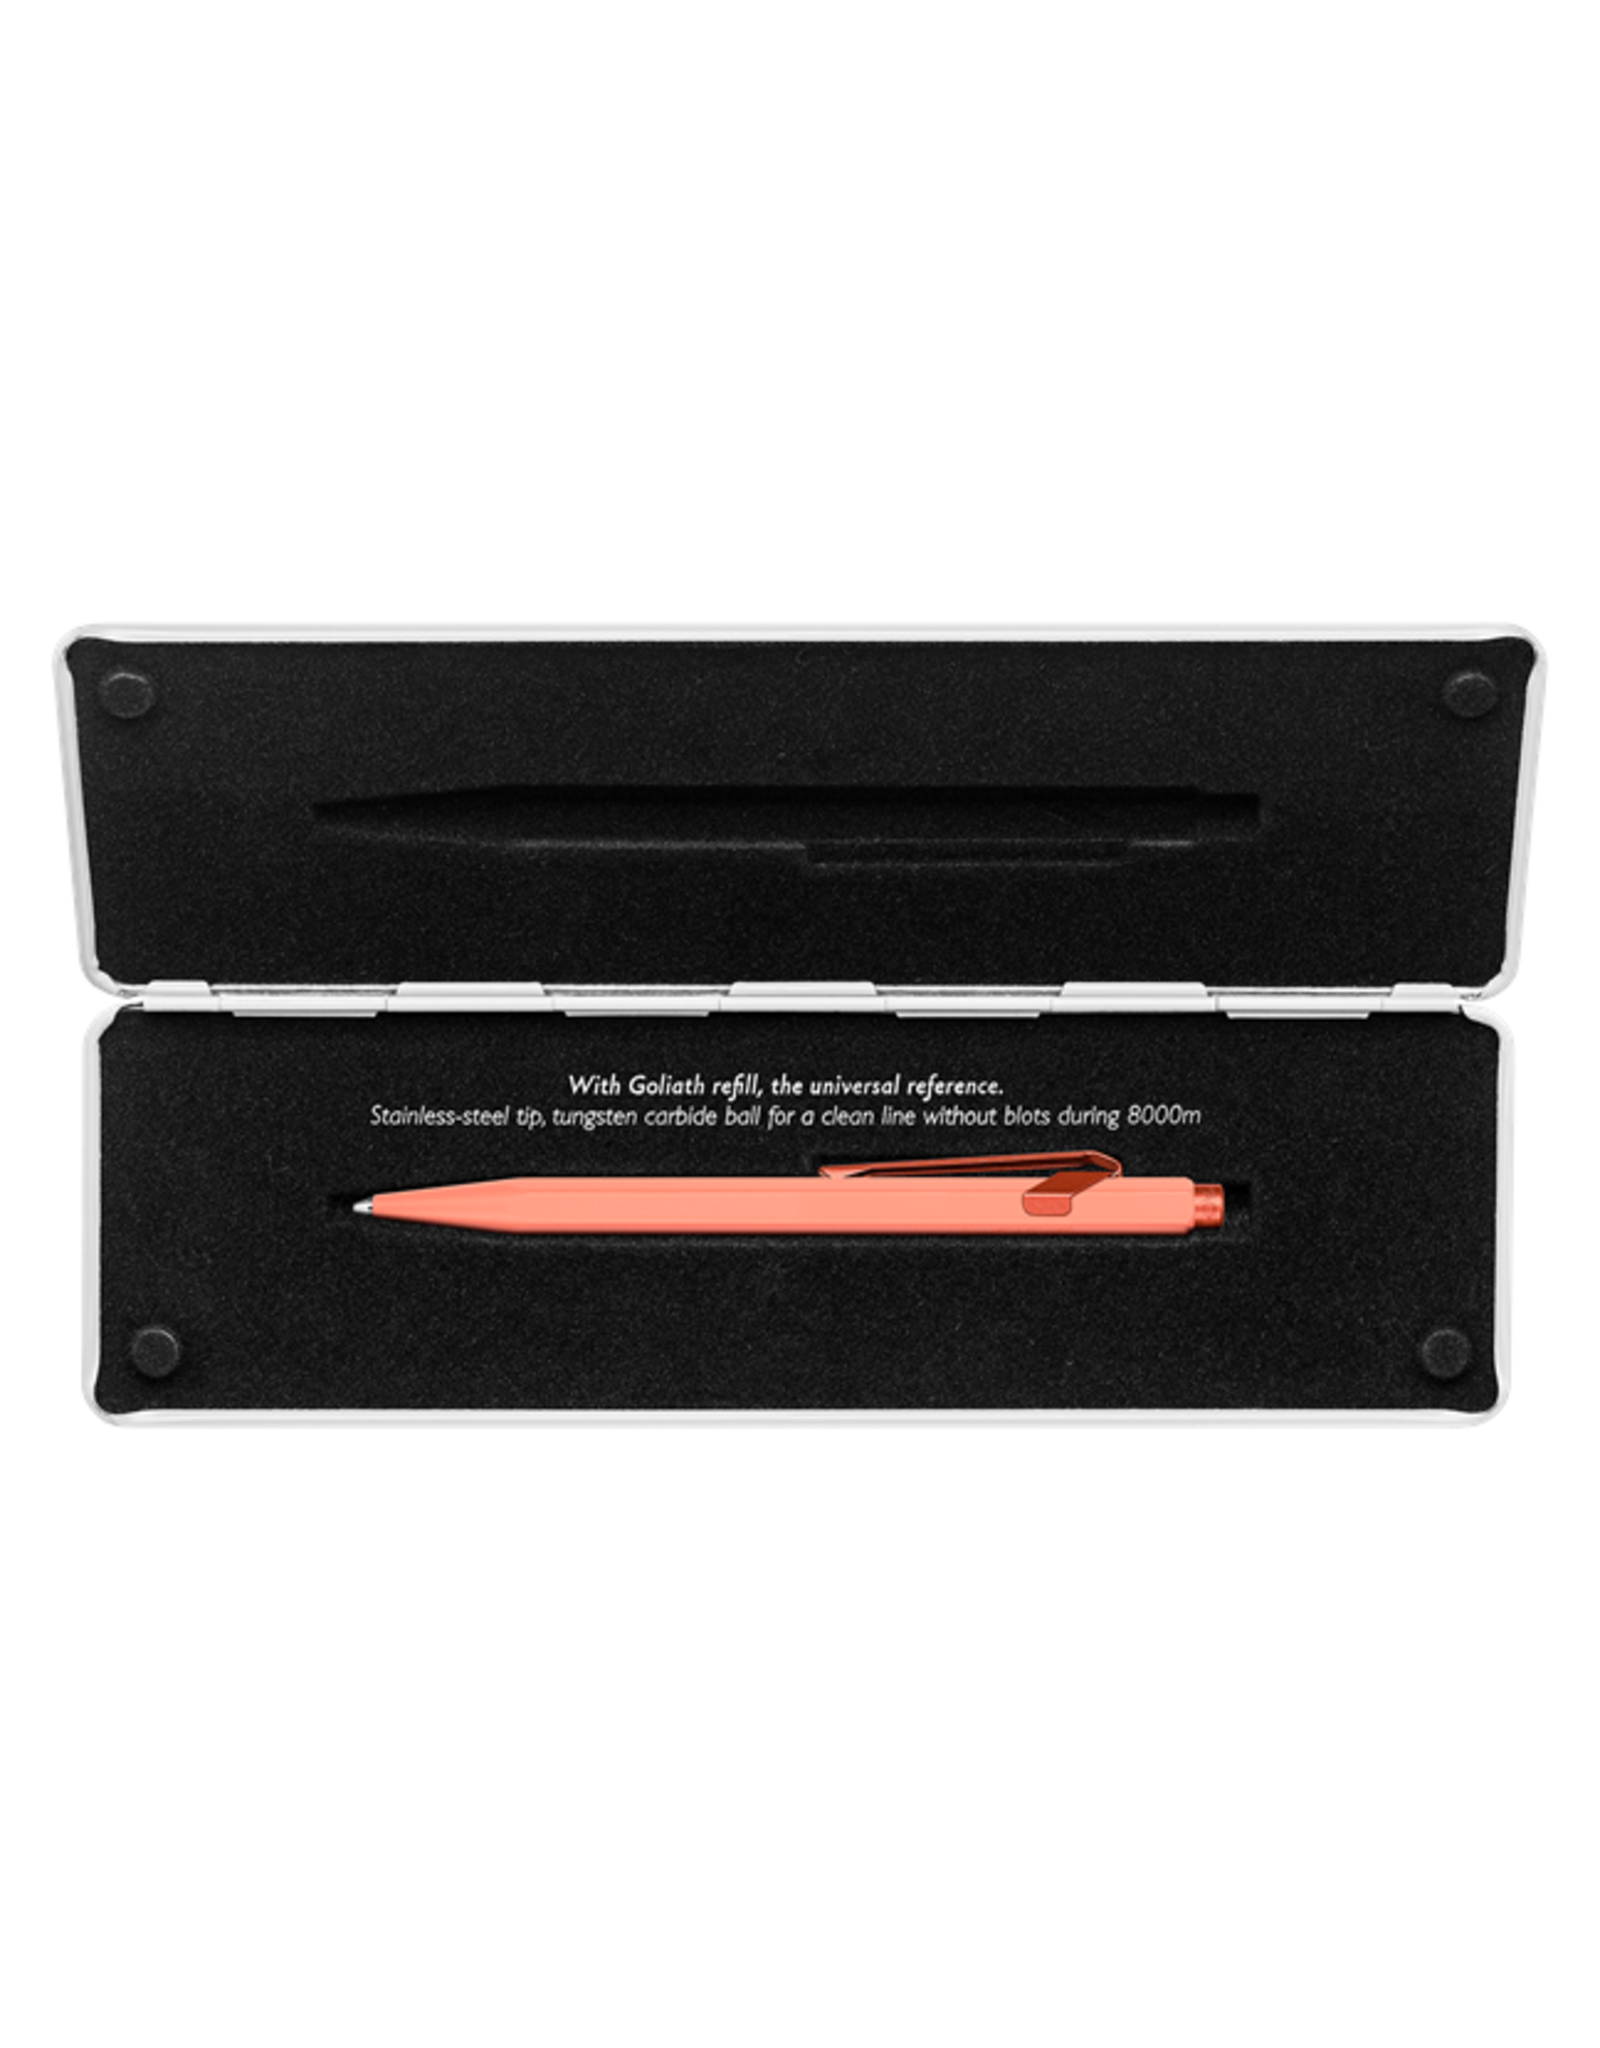 Caran d’Ache Ballpoint Pen 849 CLAIM YOUR STYLE Limited edition